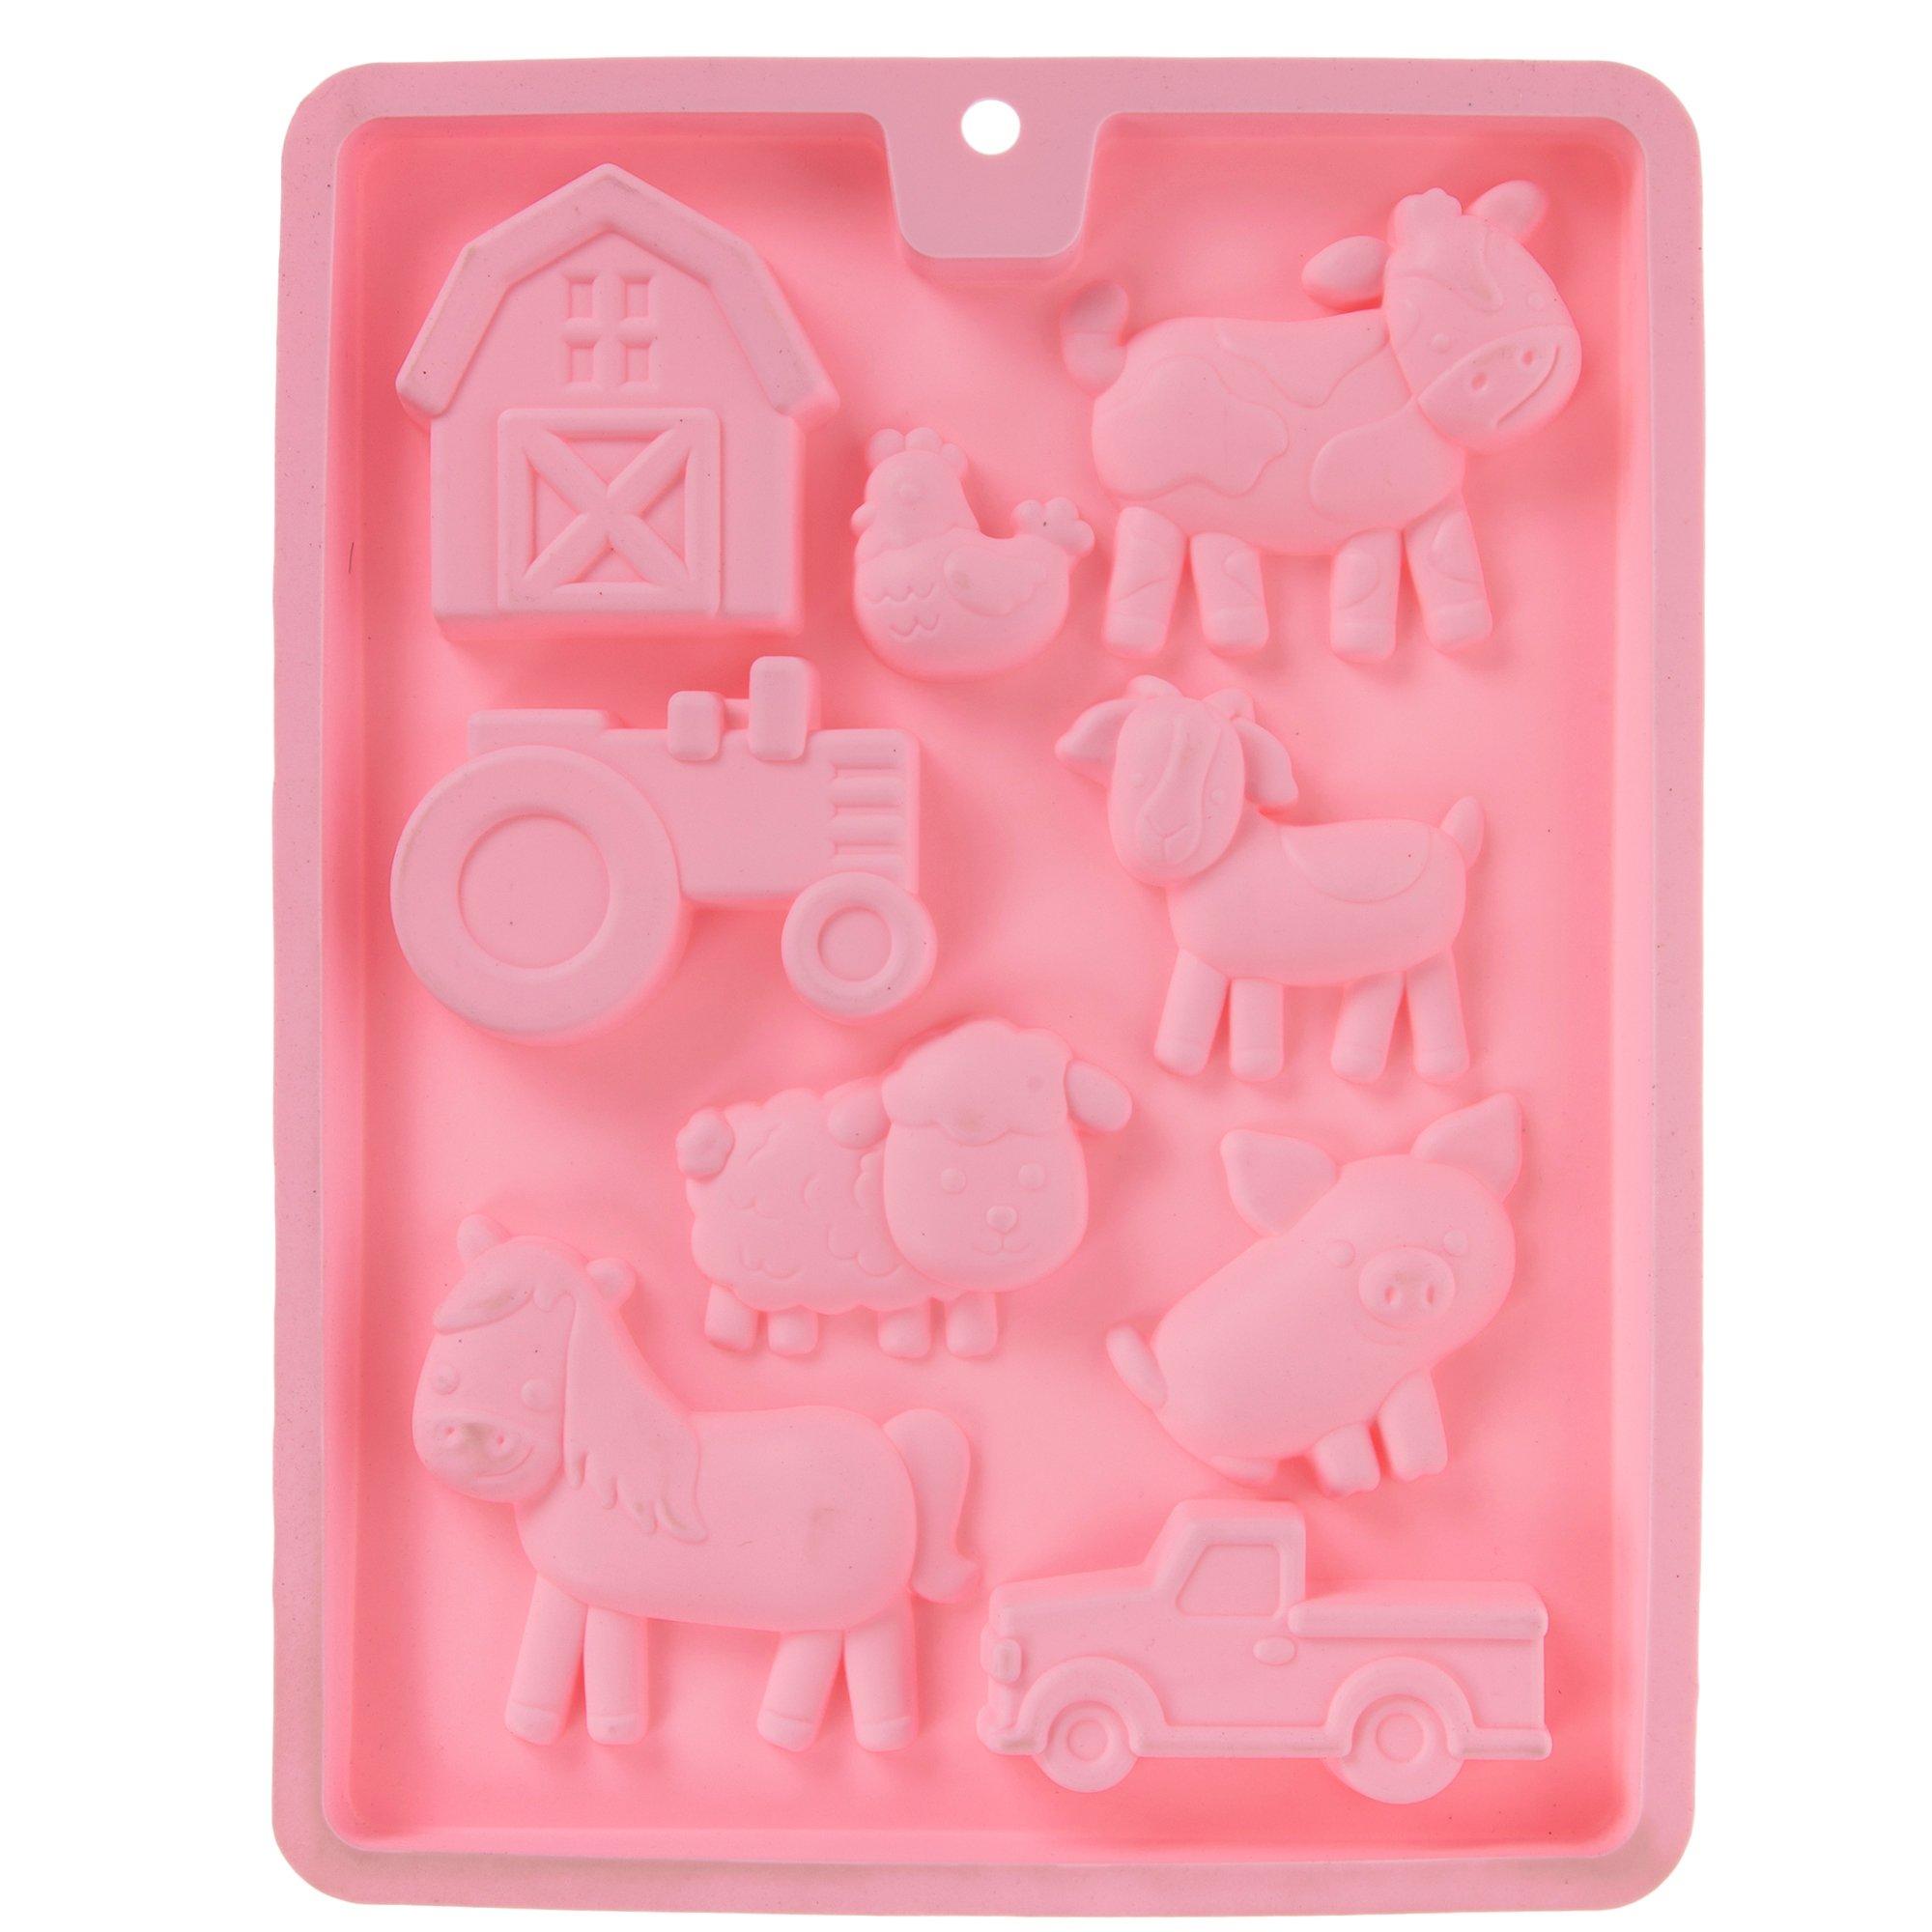 Show Steer Candy Mold – The Branded Barn